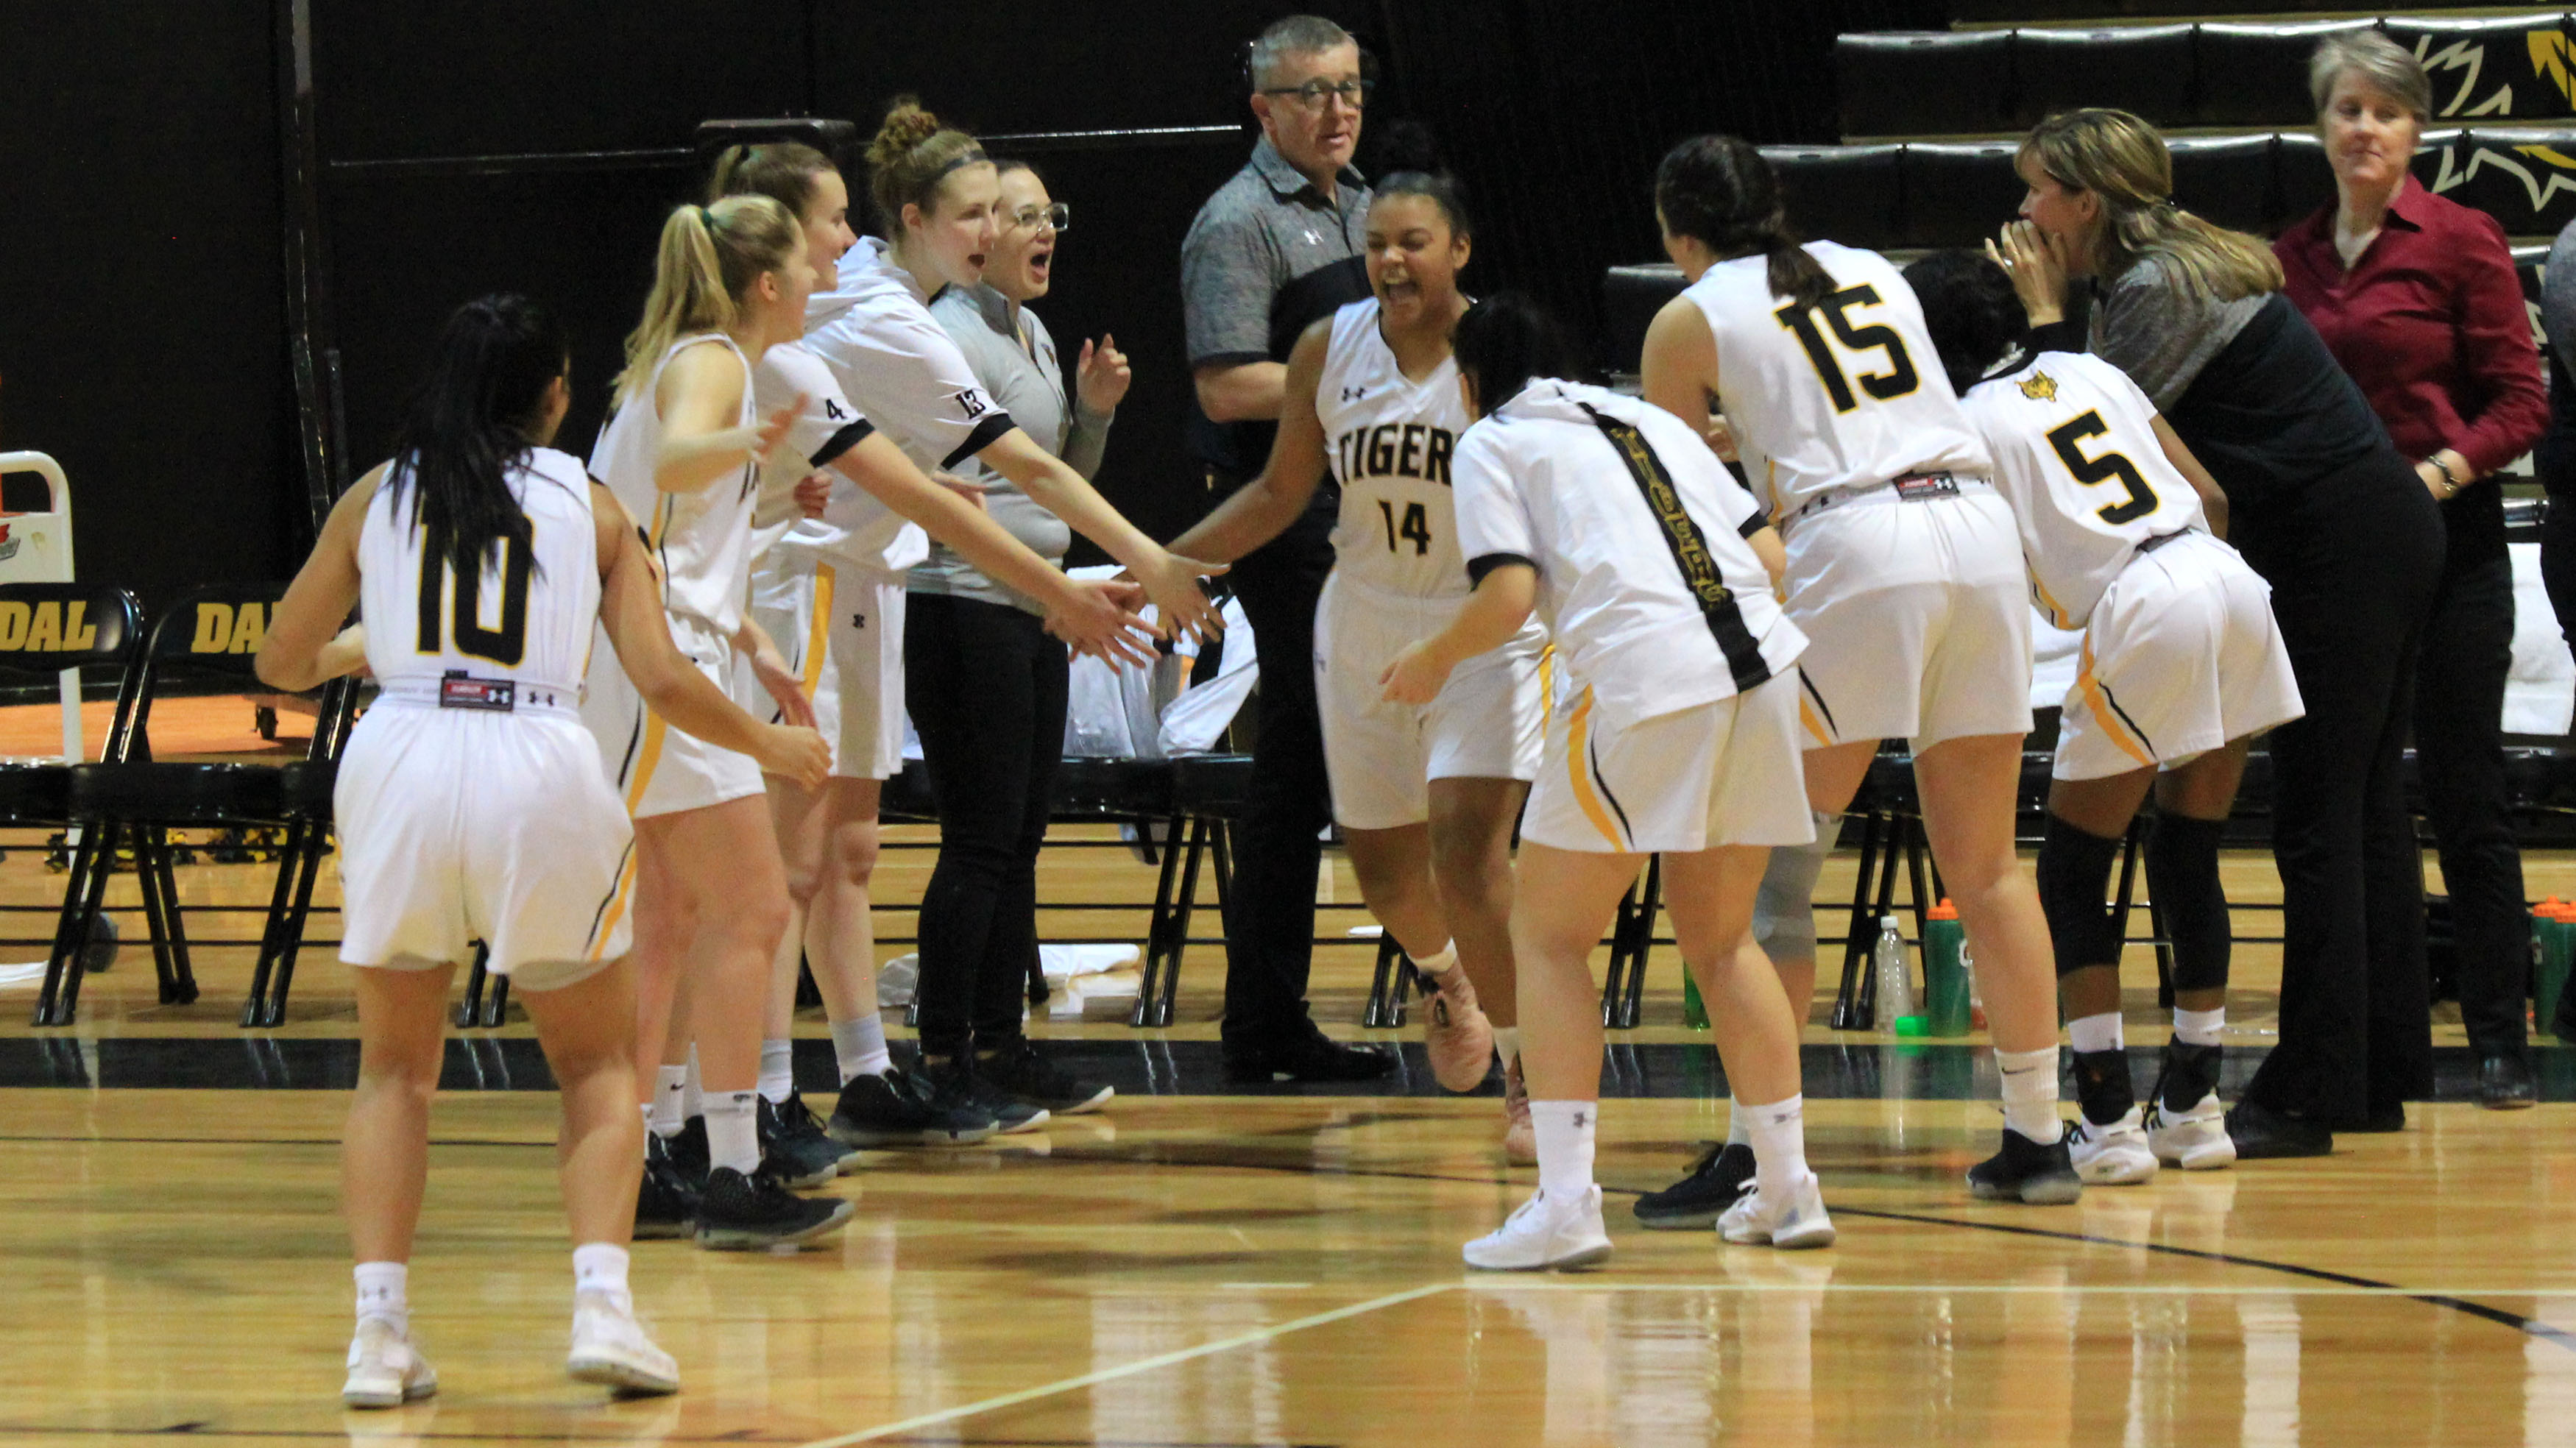 The Dalhousie women's basketball team cheers on the starting lineup as they step onto the court. 